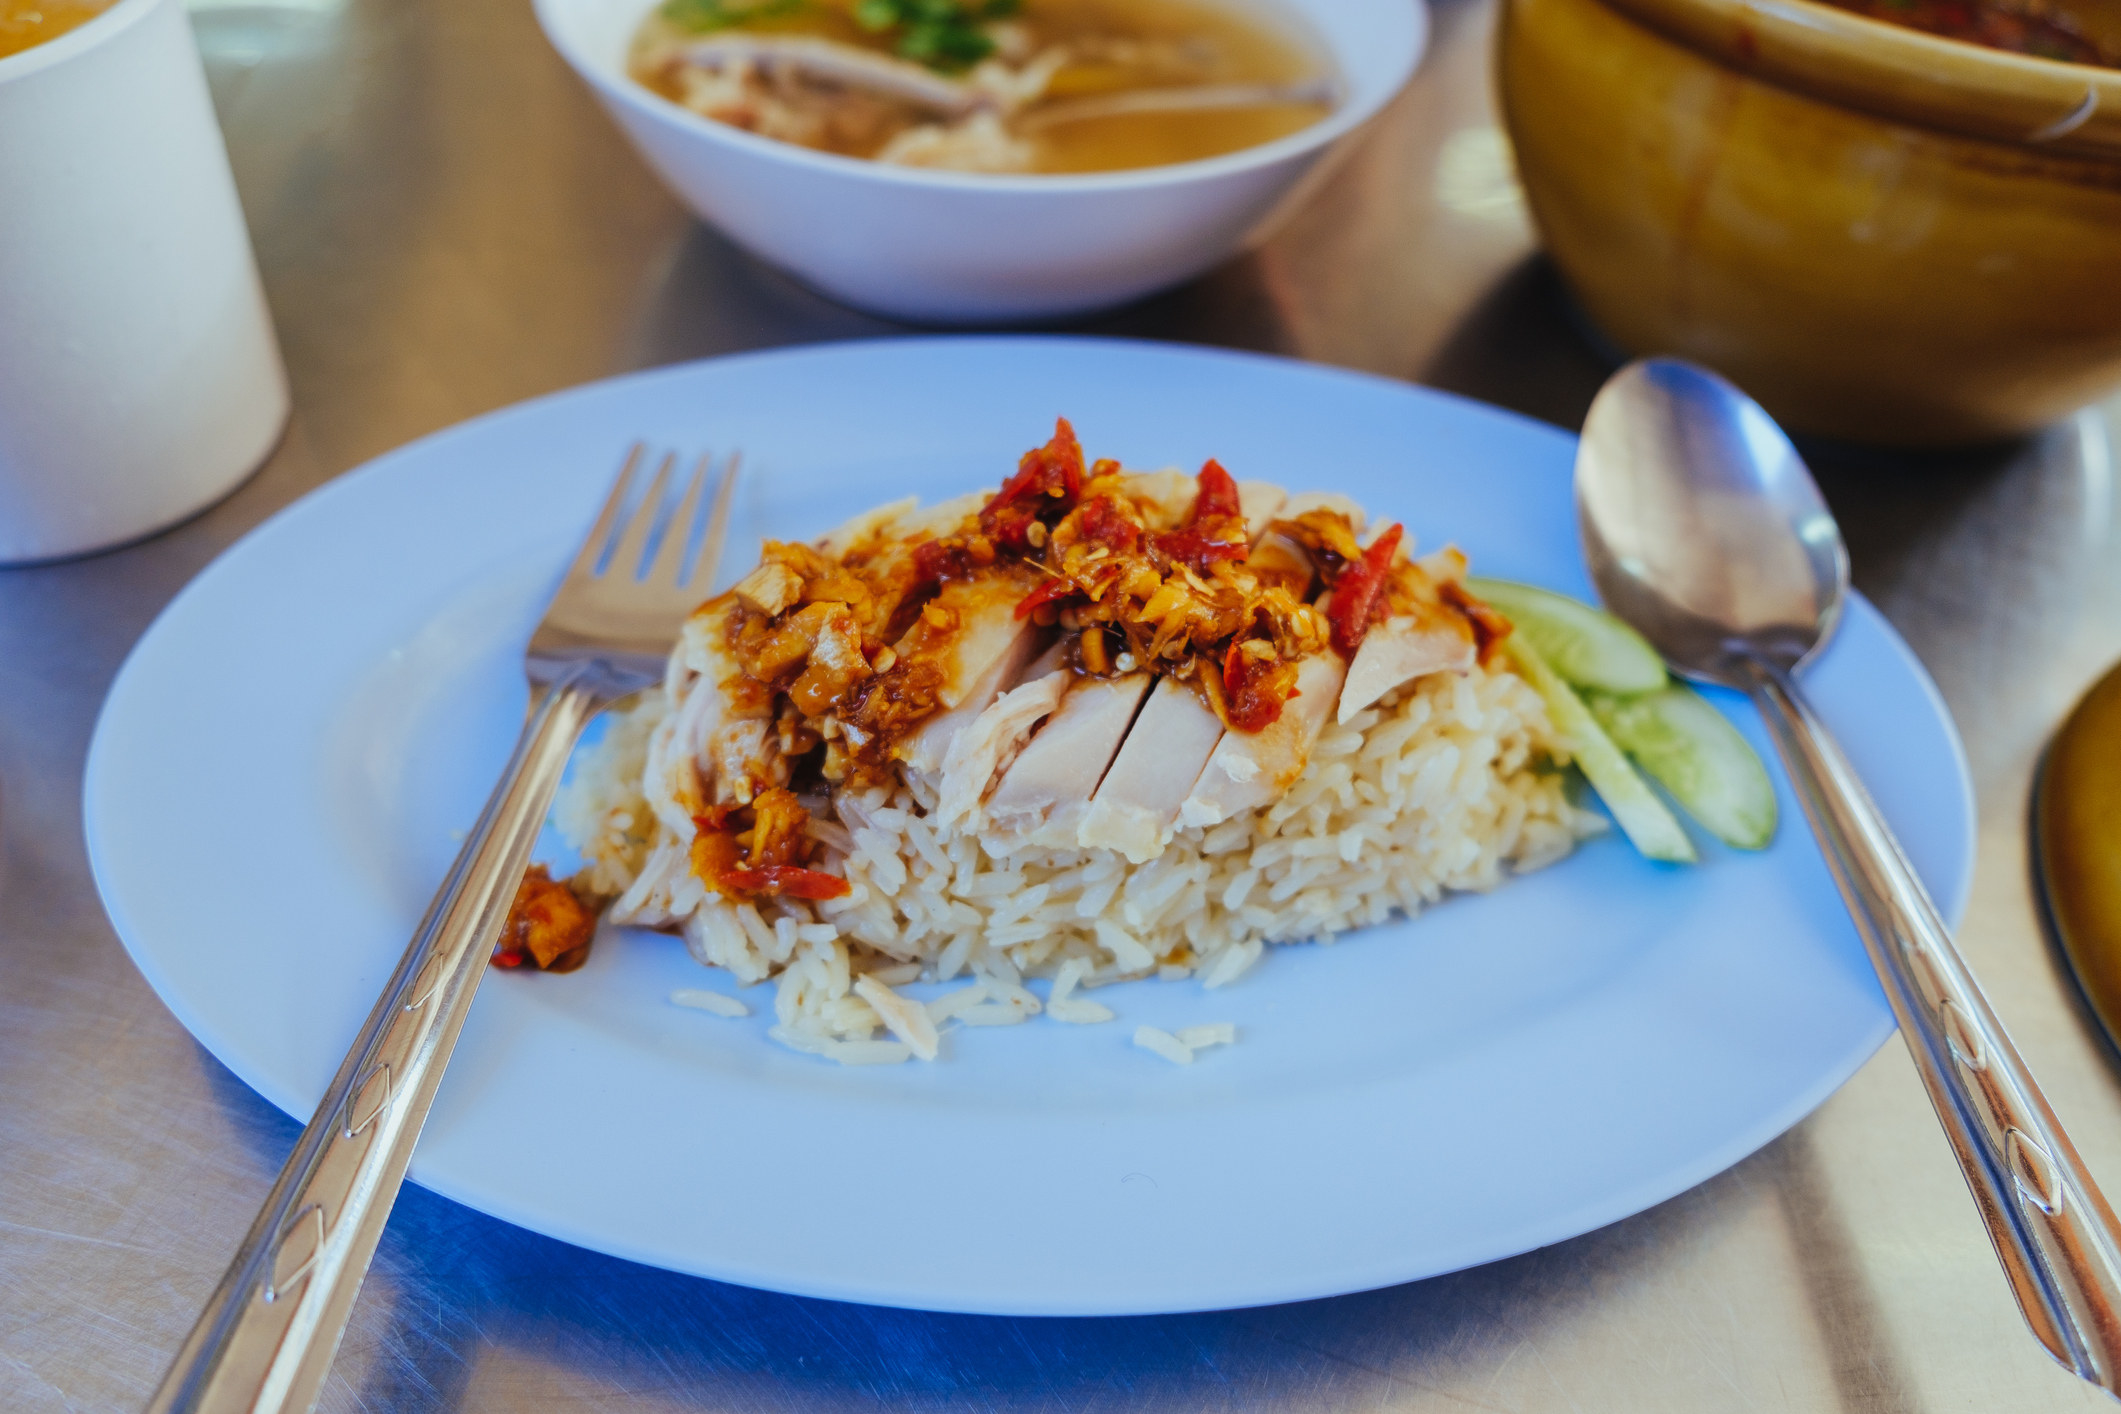 Hainanese chicken rice with spicy chili oil.